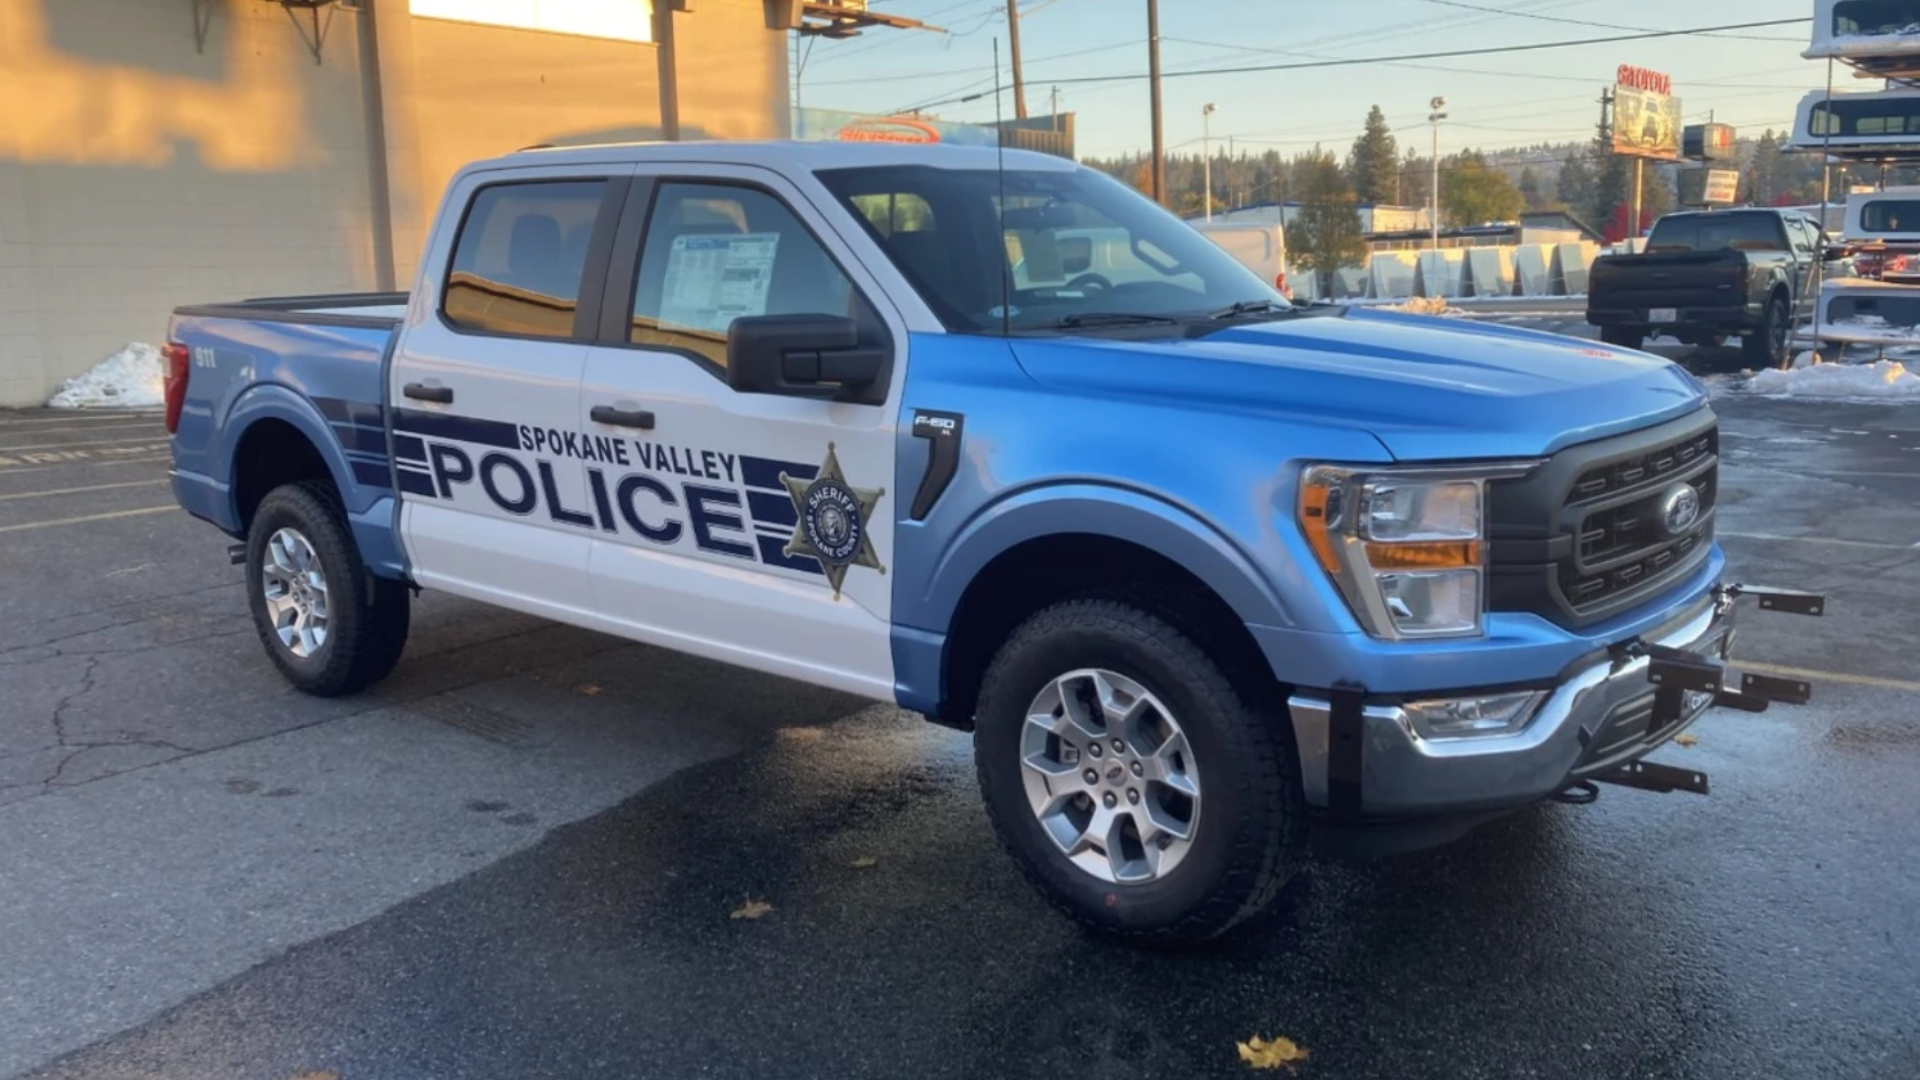 Spokane Valley Police Department's blue and white Ford F-250 patrol truck parked outside, with the police badge and emergency contact number prominently displayed.